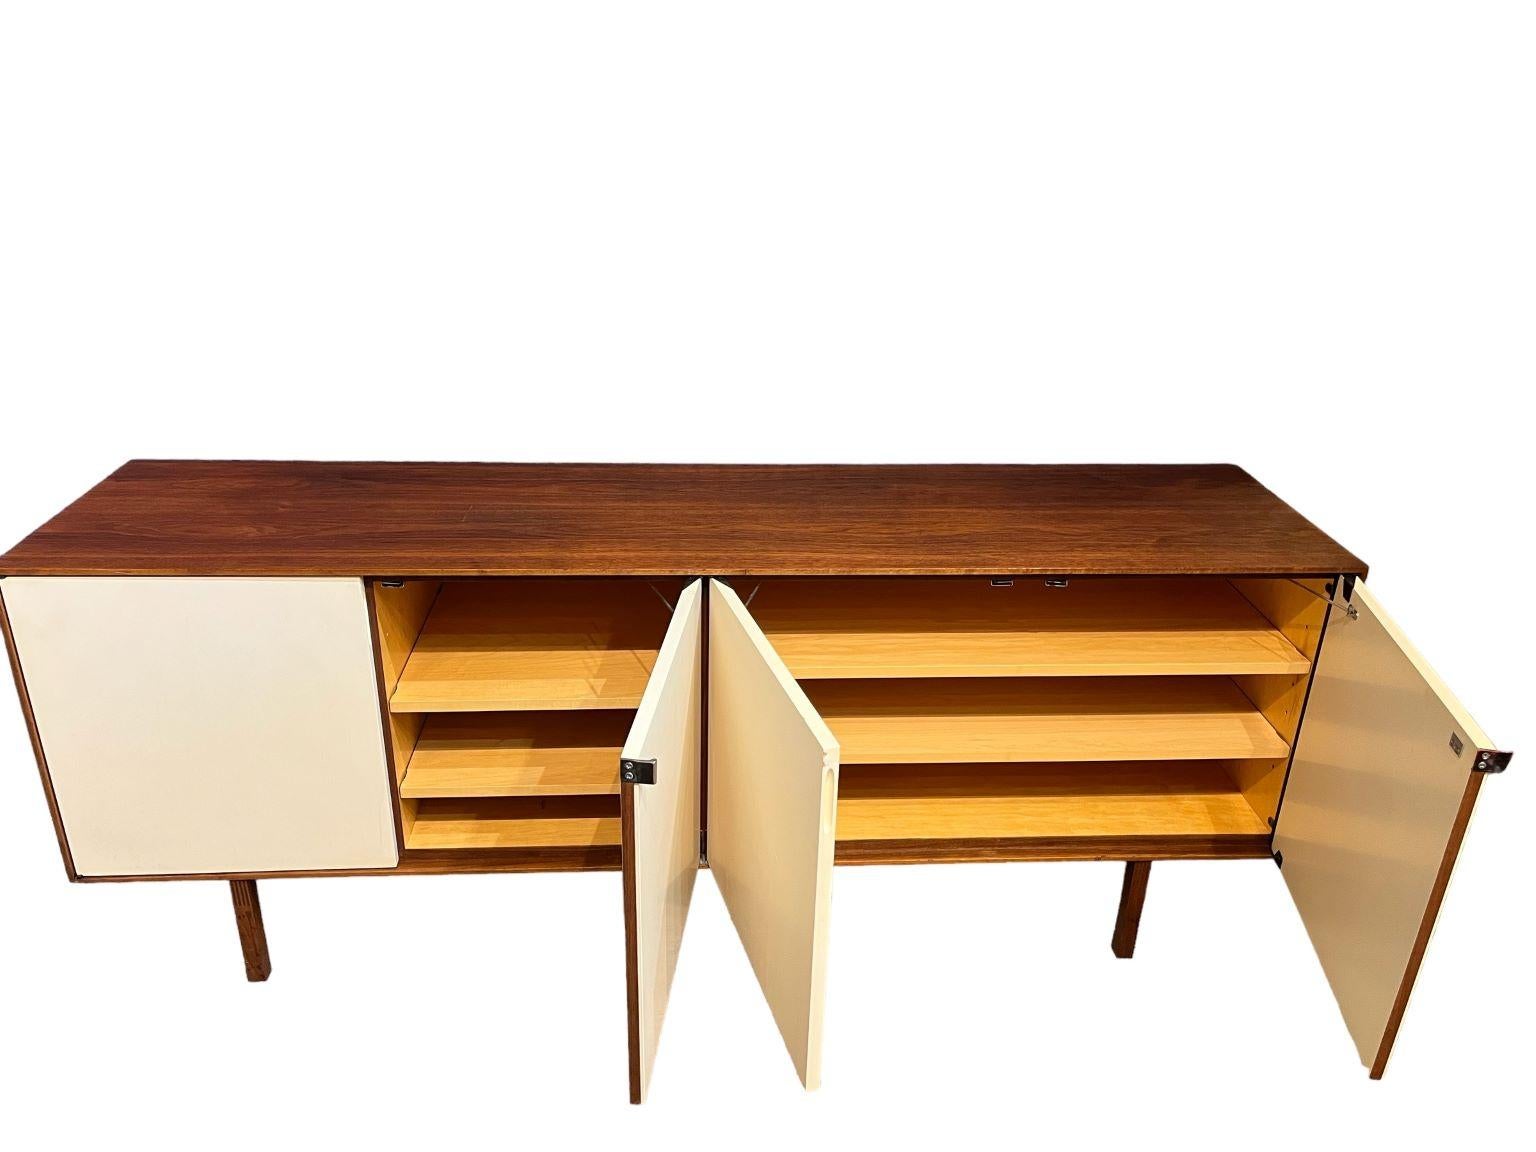 Early Florance Knoll For Knoll Associates Walnut And Cream Credenza C.1950 For Sale 1